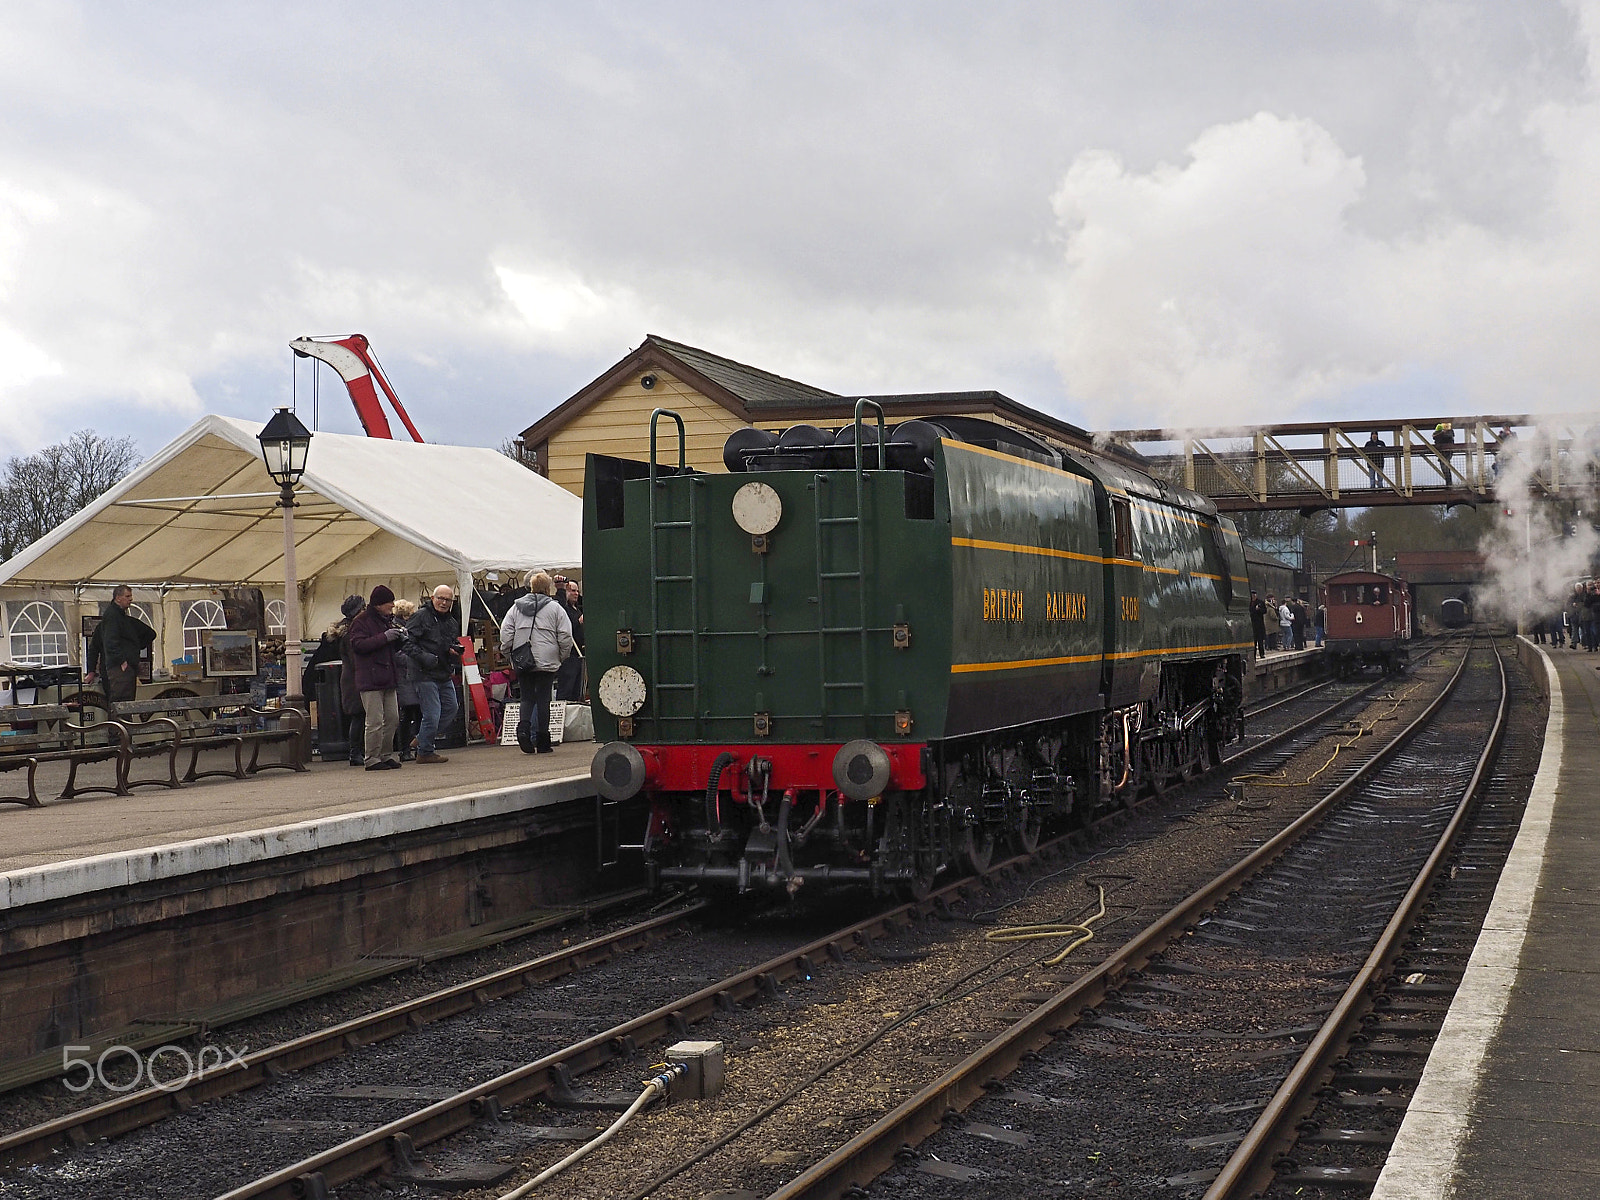 Olympus OM-D E-M1 sample photo. 92 squadron steam locomotive number 34081 at nene valley heritage railway event february 2017 photography